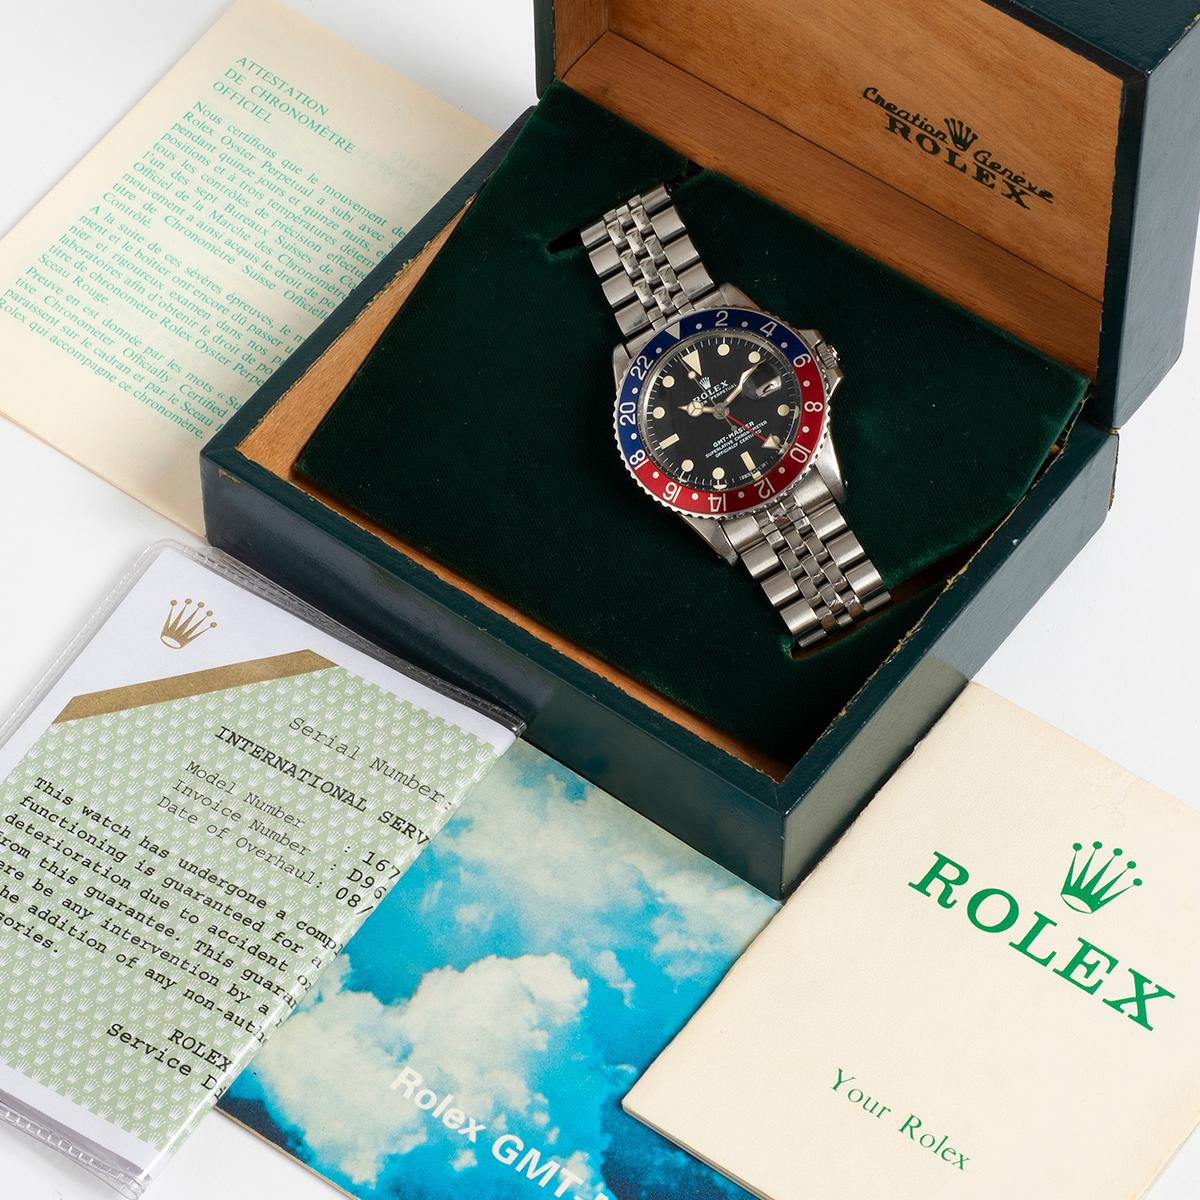 Our rare vintage Rolex GMT Master, reference 1675 , is presented in excellent condition for its age. Featuring a classic combination of pepsi blue and red bezel, stainless steel case and stainless steel jubilee bracelet. The original matching hands